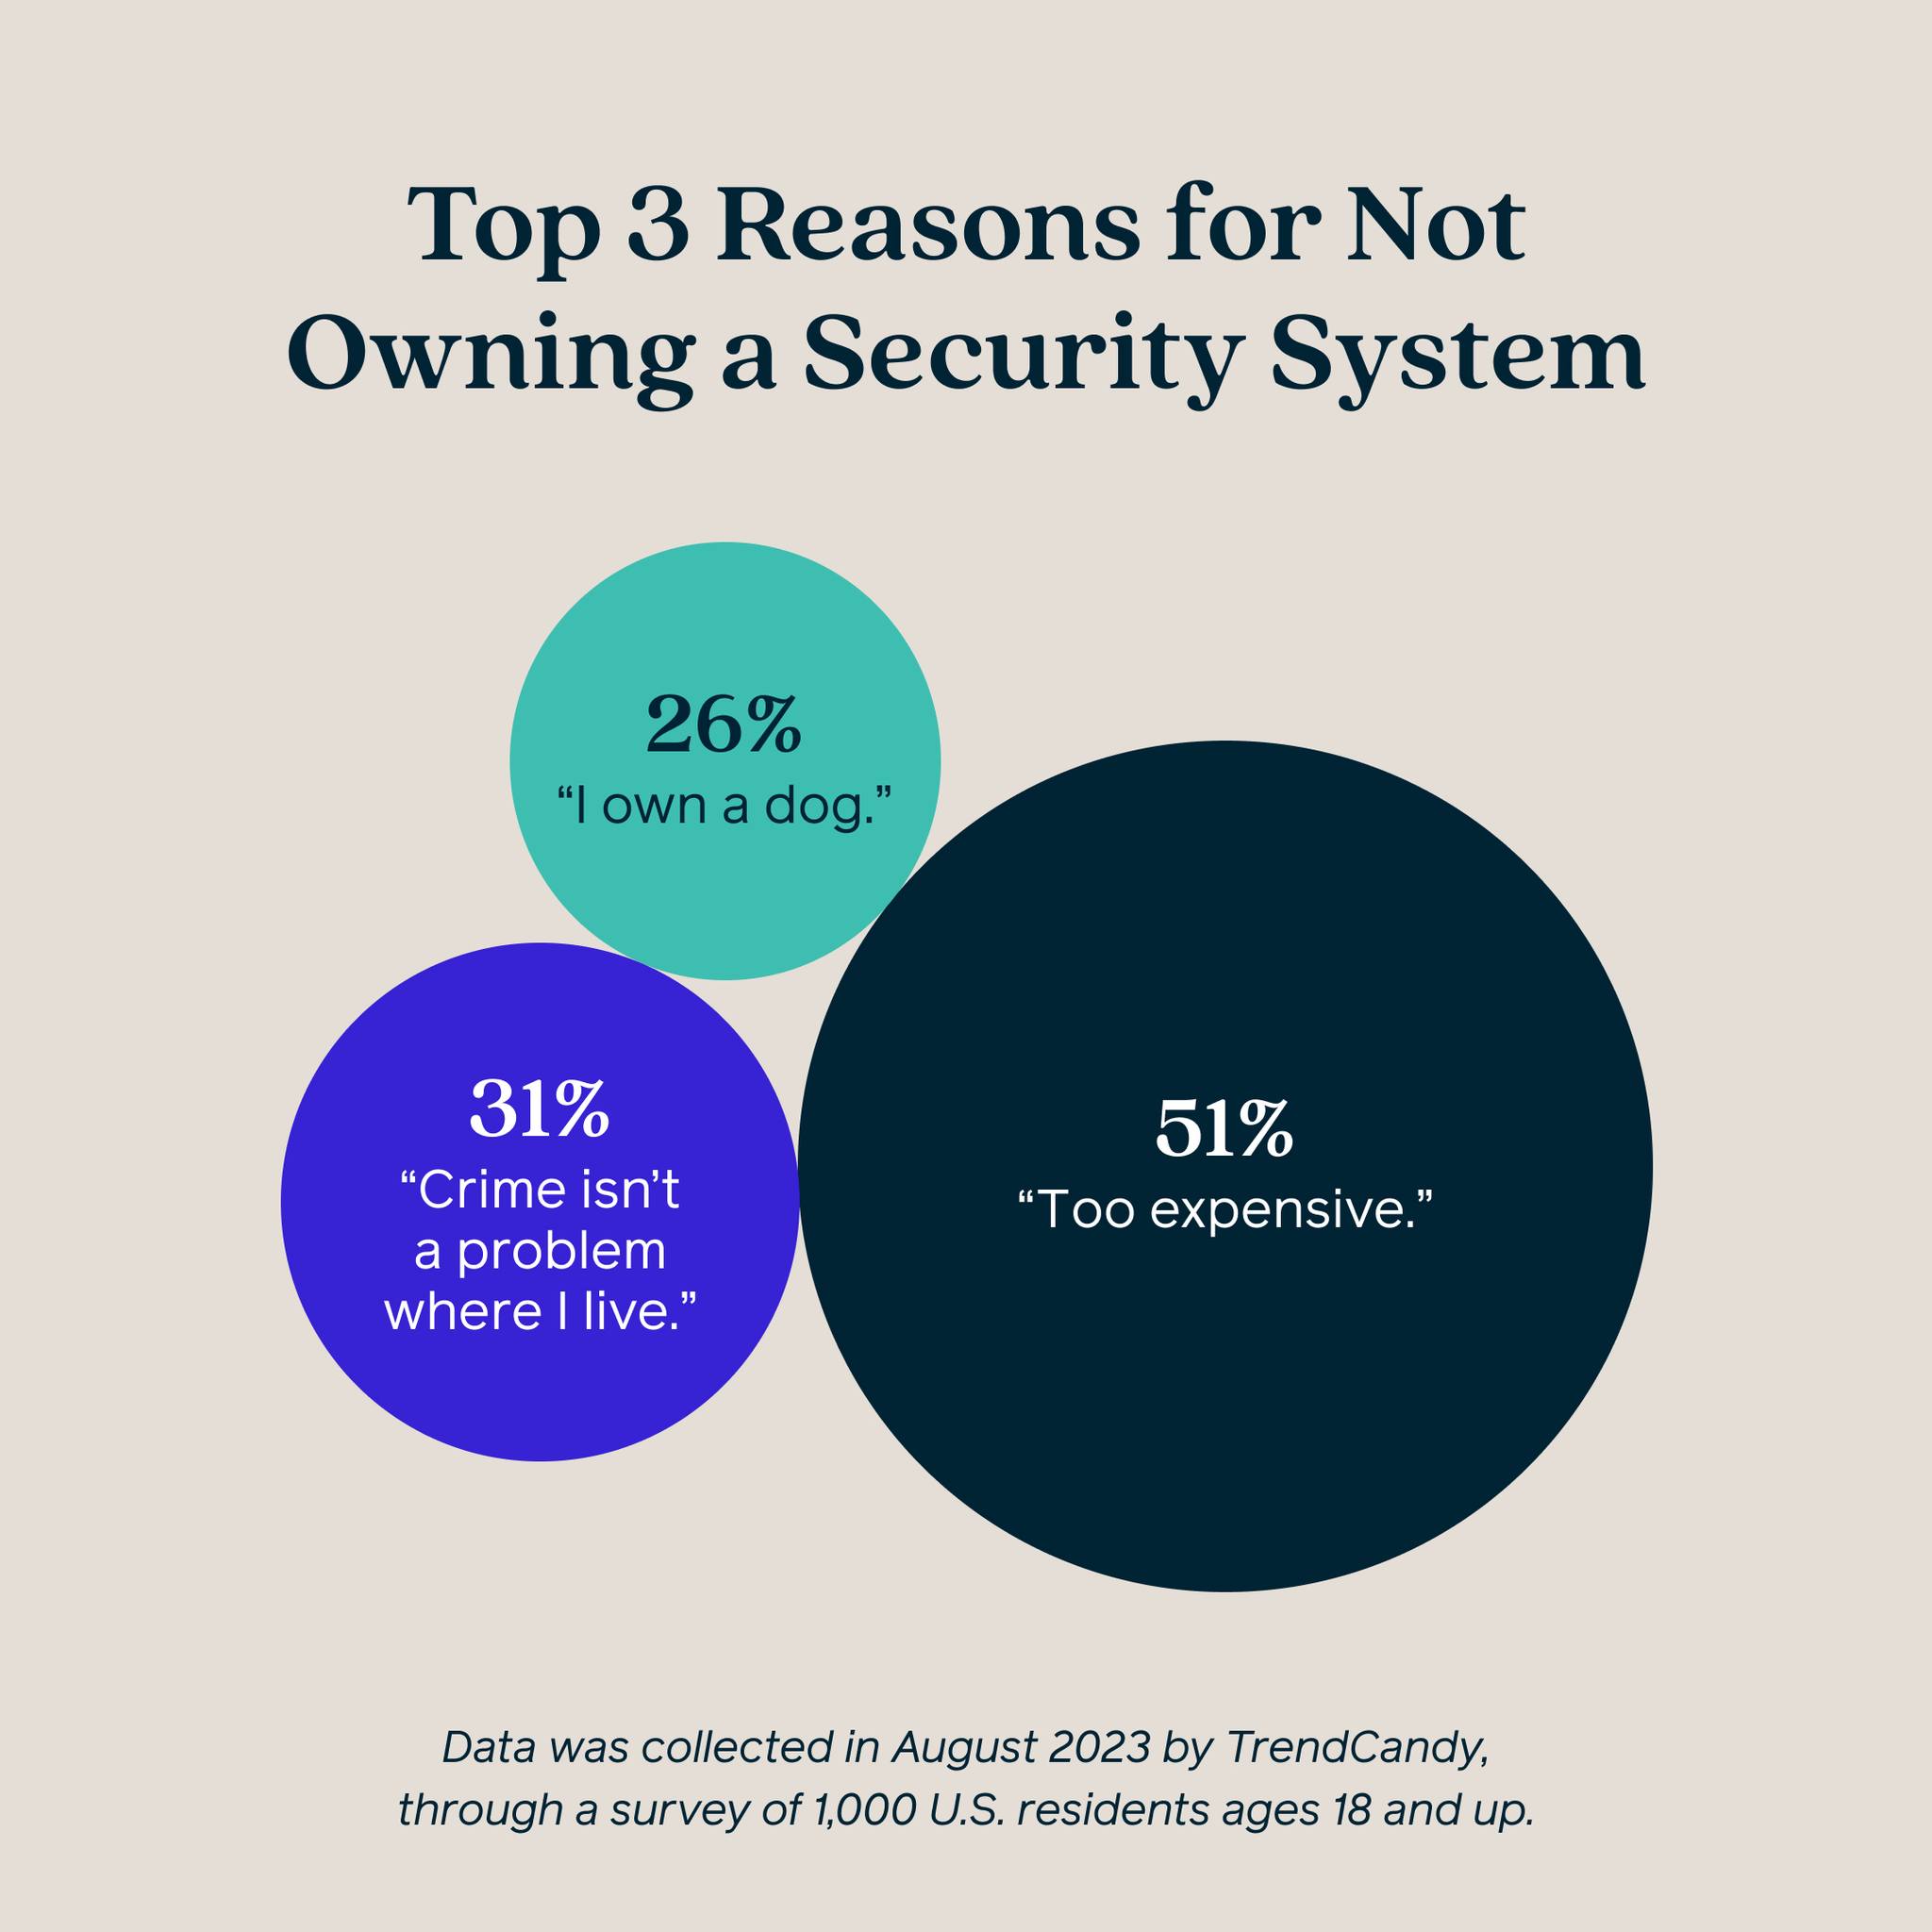 Home security survey found why people don't own a system.